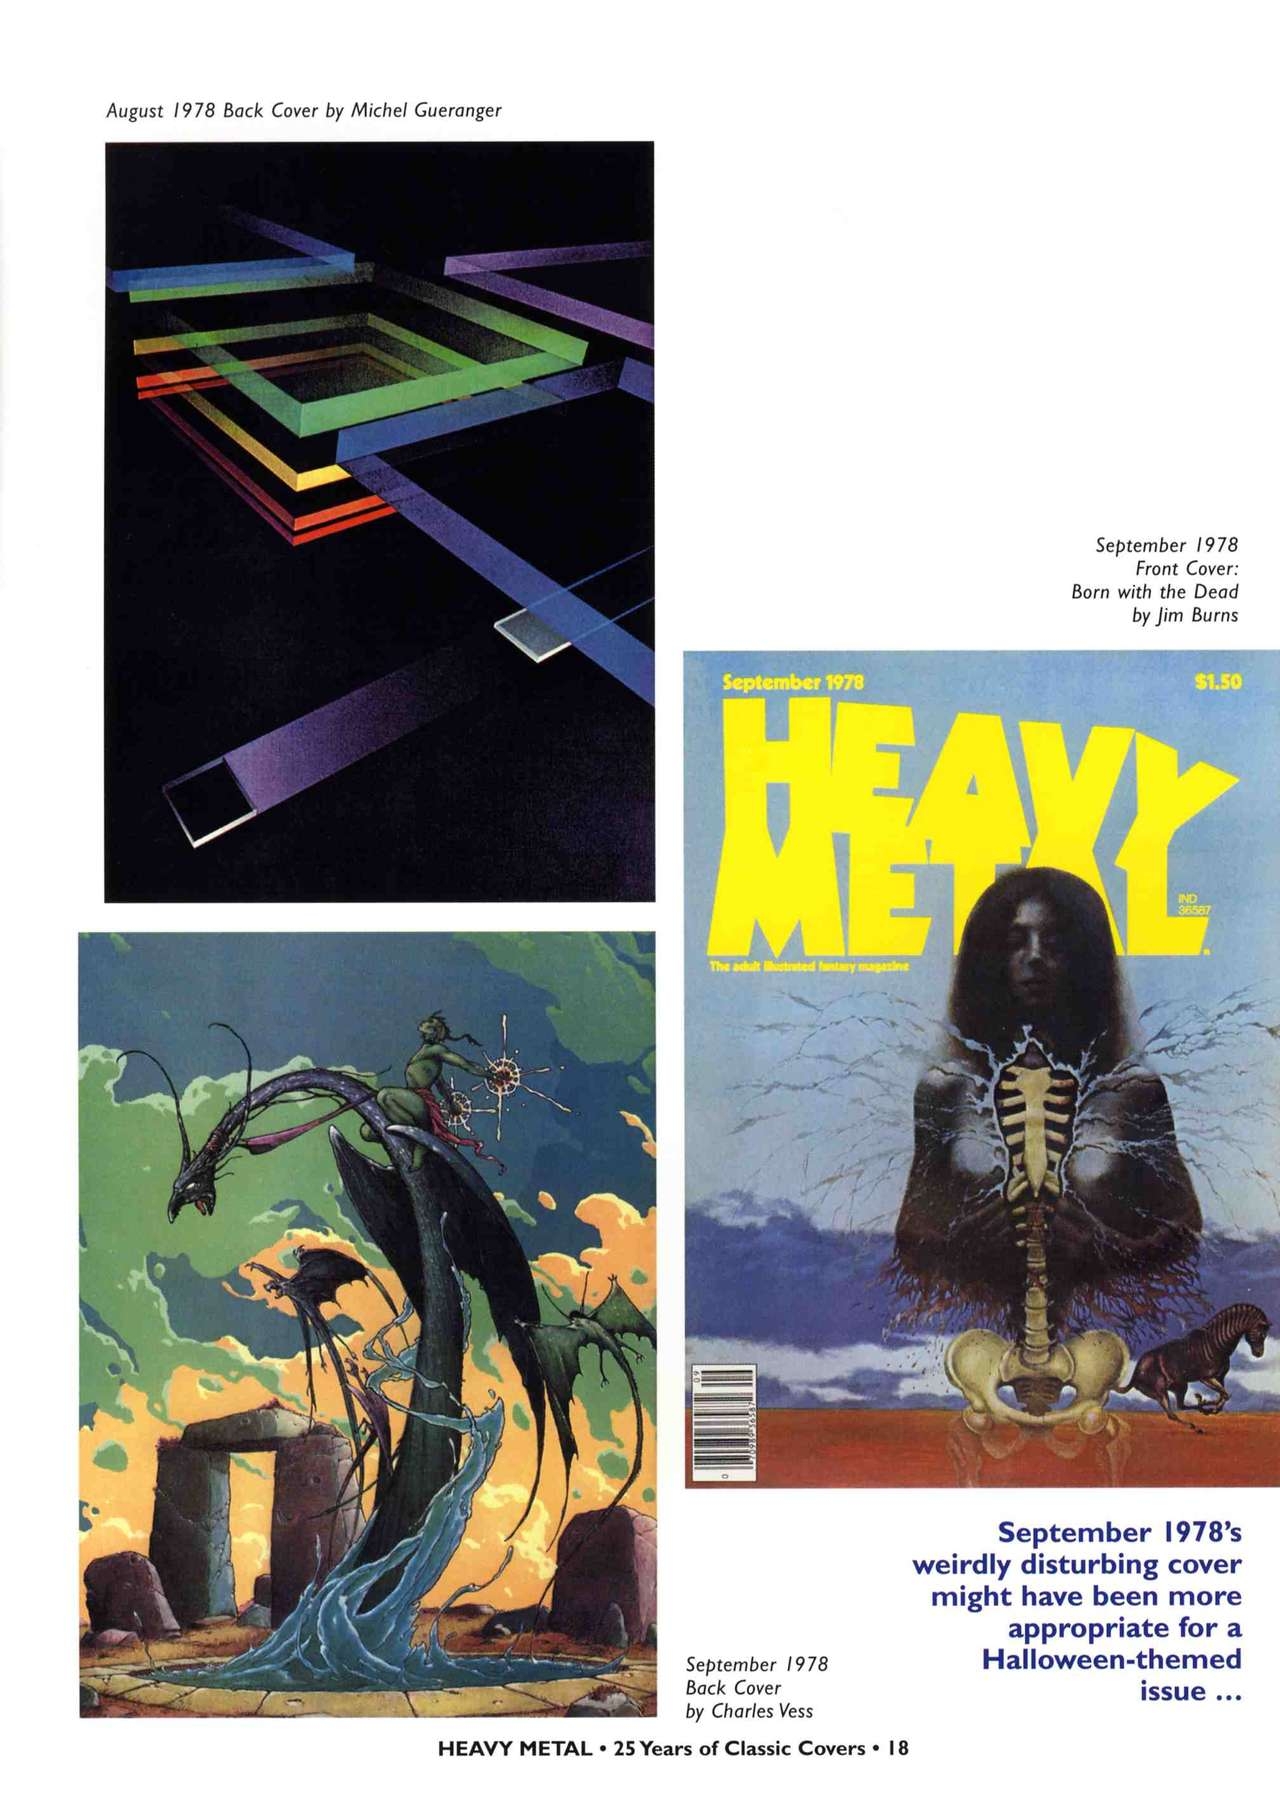 HEAVY METAL 25 Years of Classic Covers 23